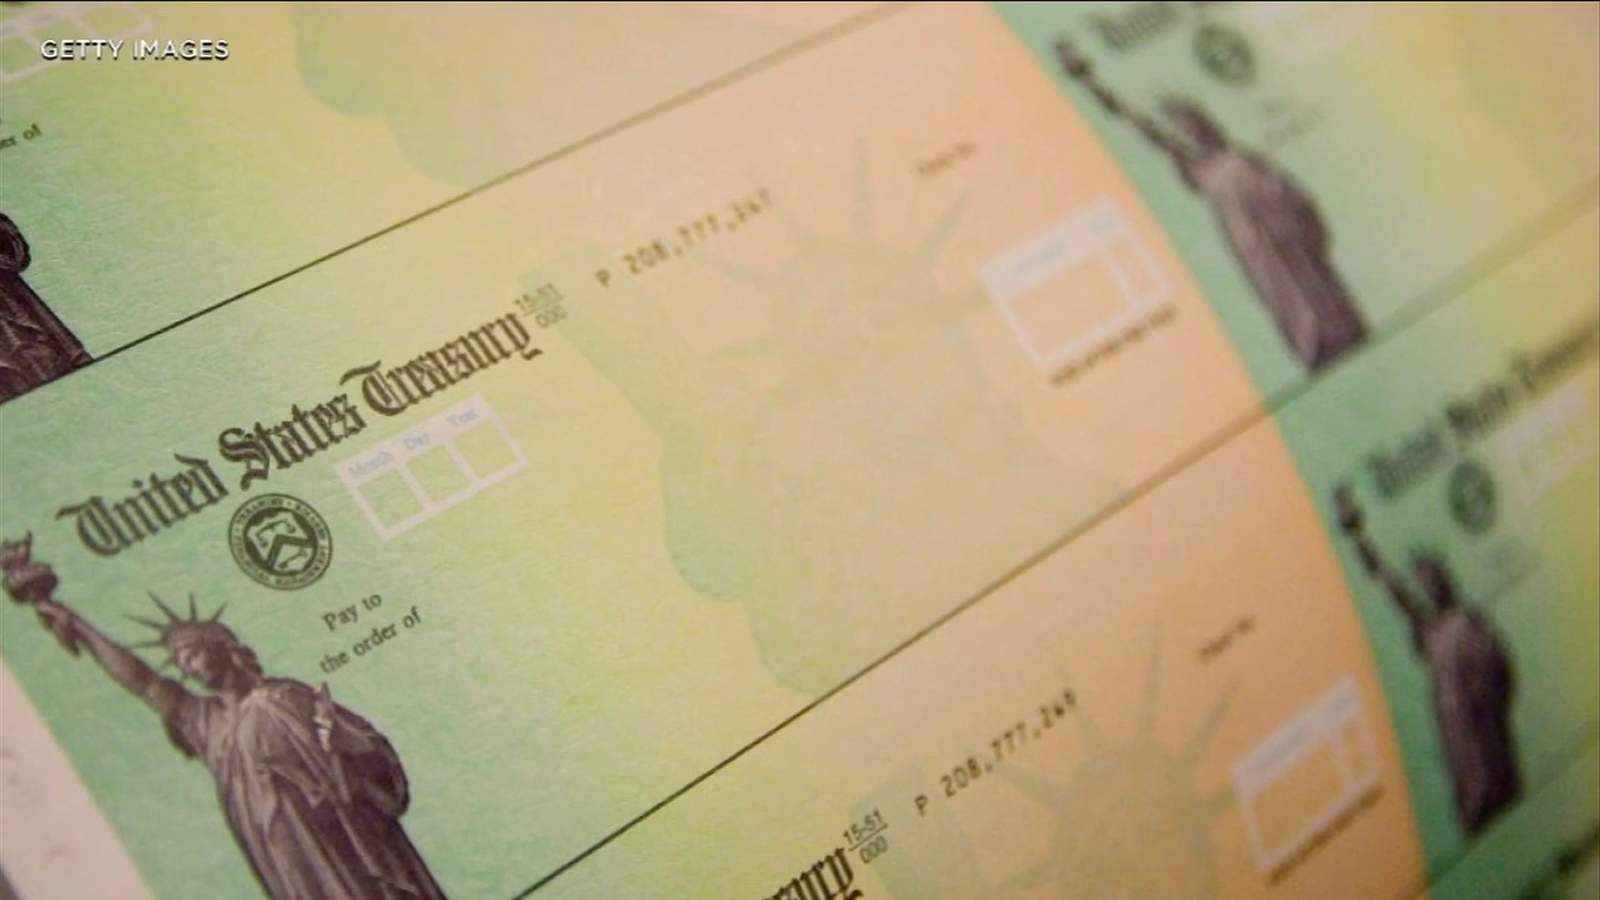 IRS sends $1,200 stimulus checks to dead people, reports say